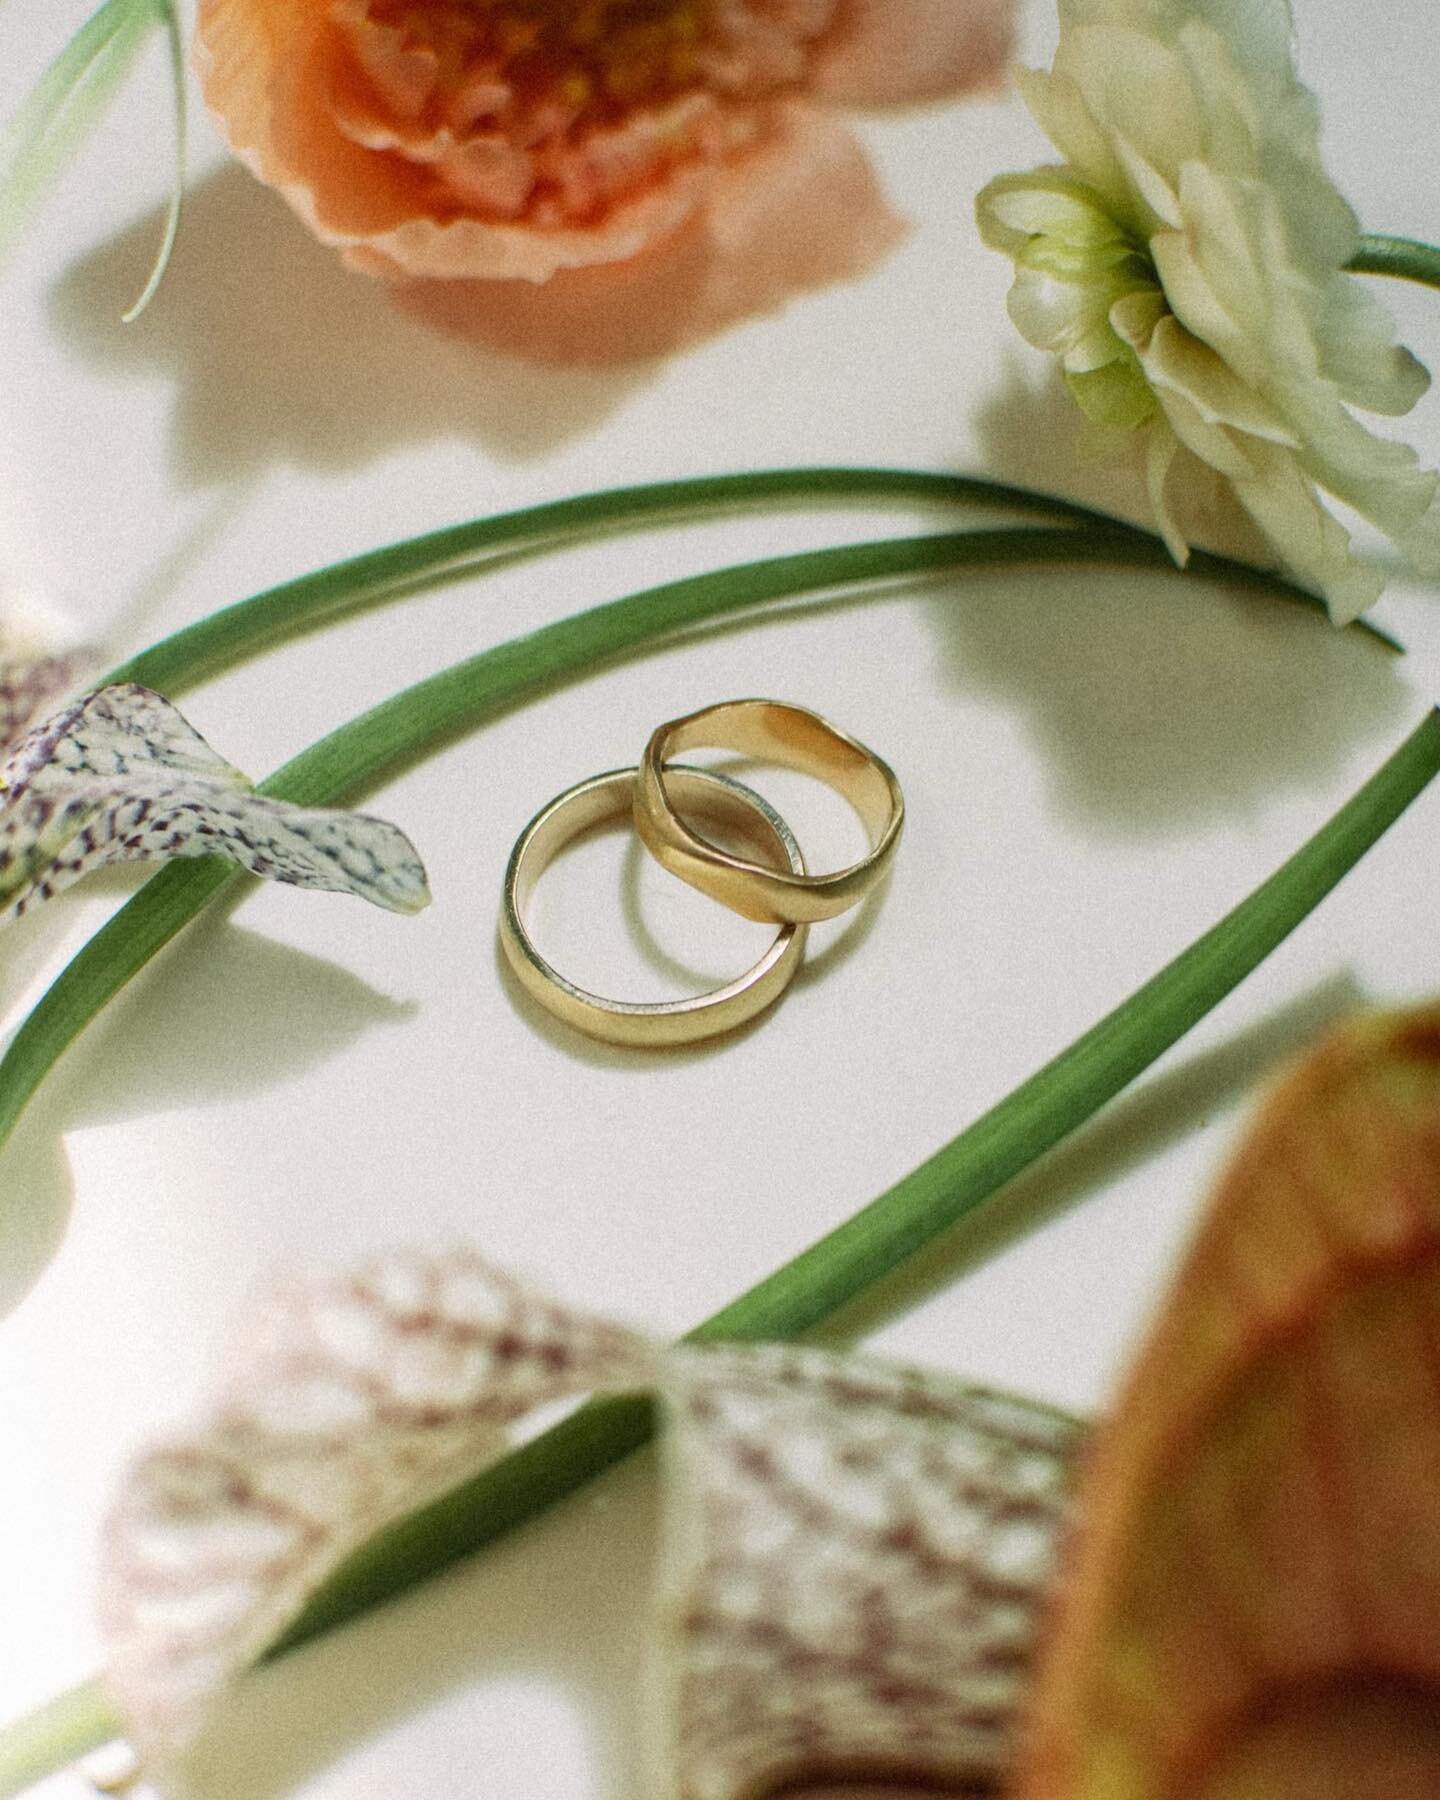 I had the pleasure of making these funky, natural and simple gold bands for my beloved Chandra. She took these amazing photos and has taught me so much about photography and design. Now I can have a connection to her that she wears every day 🔗 
So m